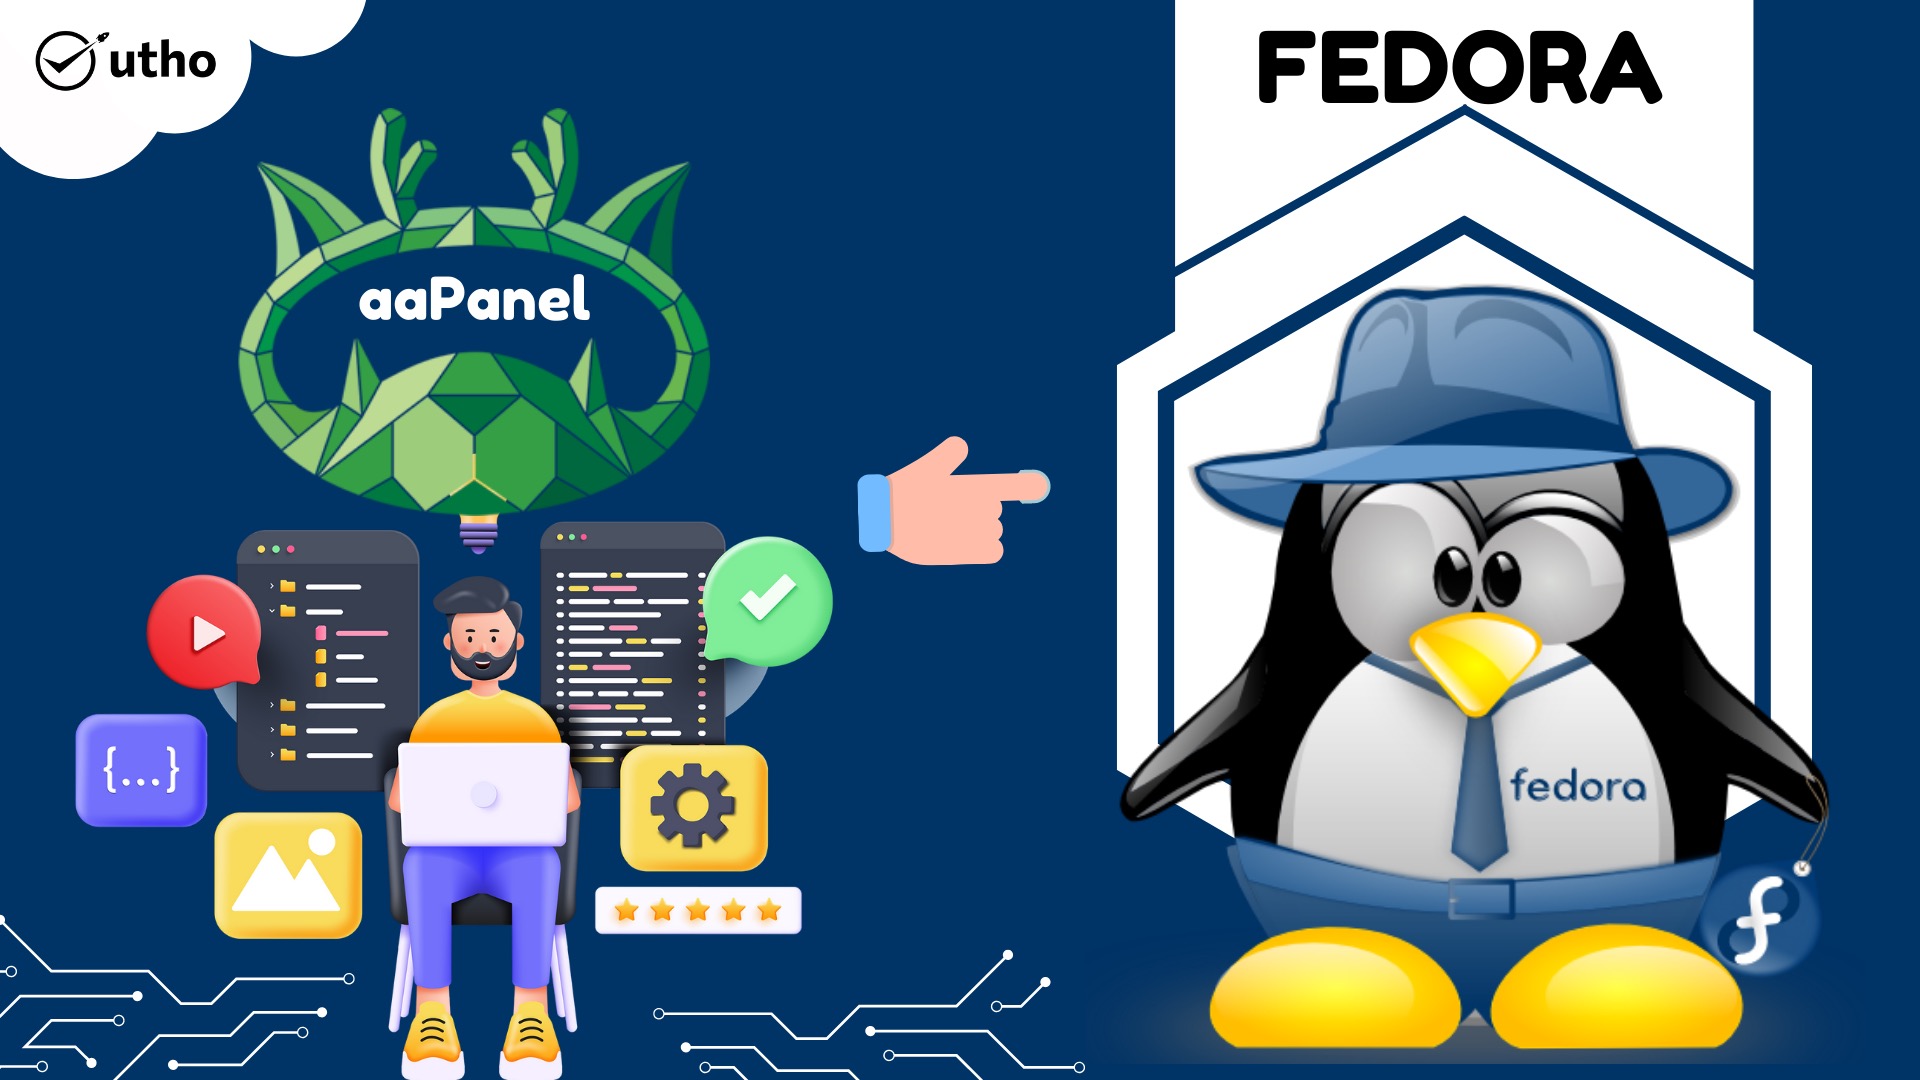 How to install aaPanel on Fedora by one click